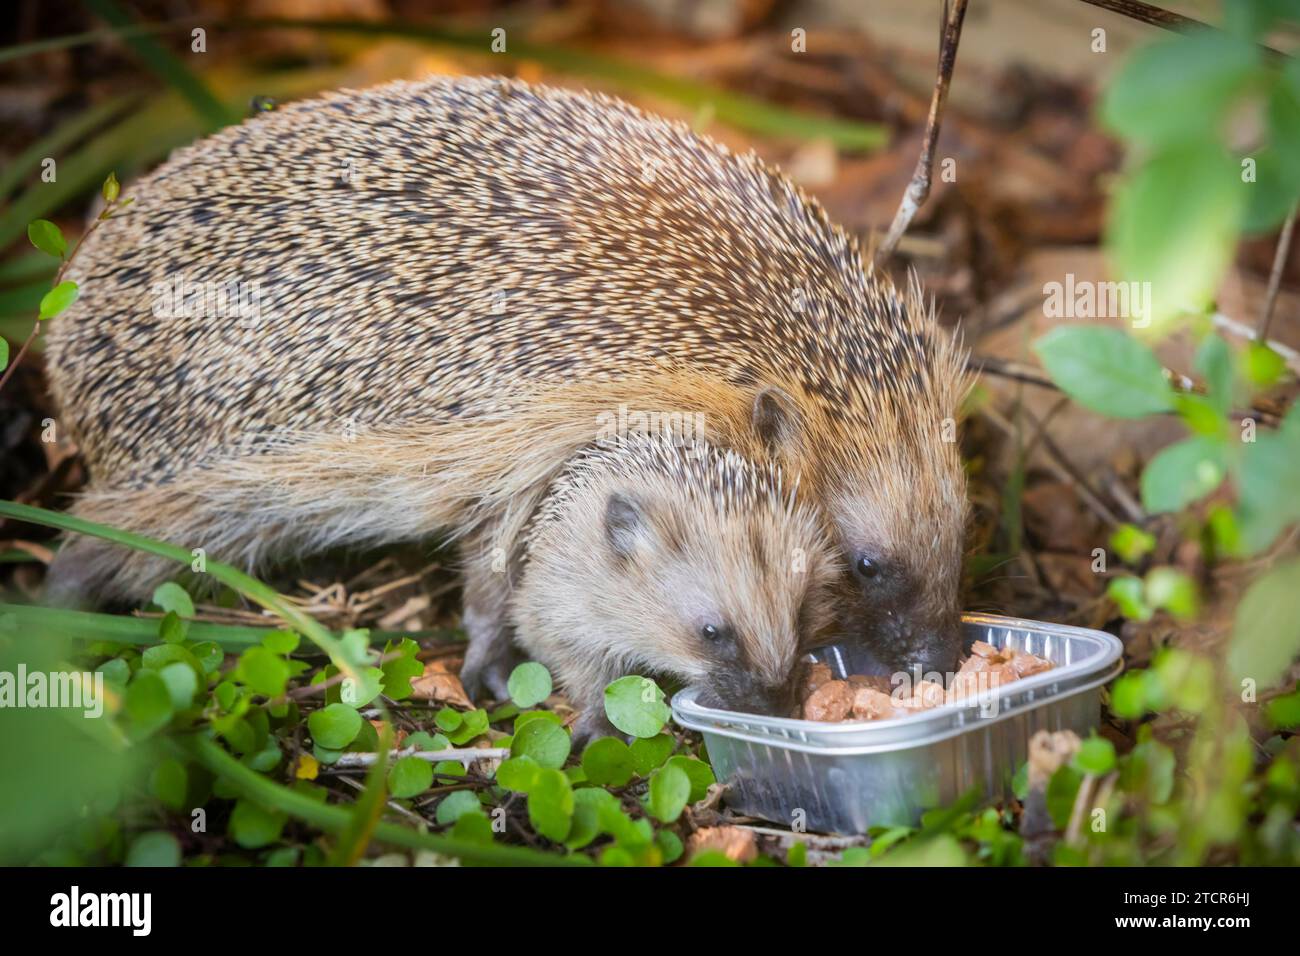 Hedgehog mother with young in the living environment of humans. A near-natural garden is a good habitat for hedgehogs, young hedgehogs can also be Stock Photo